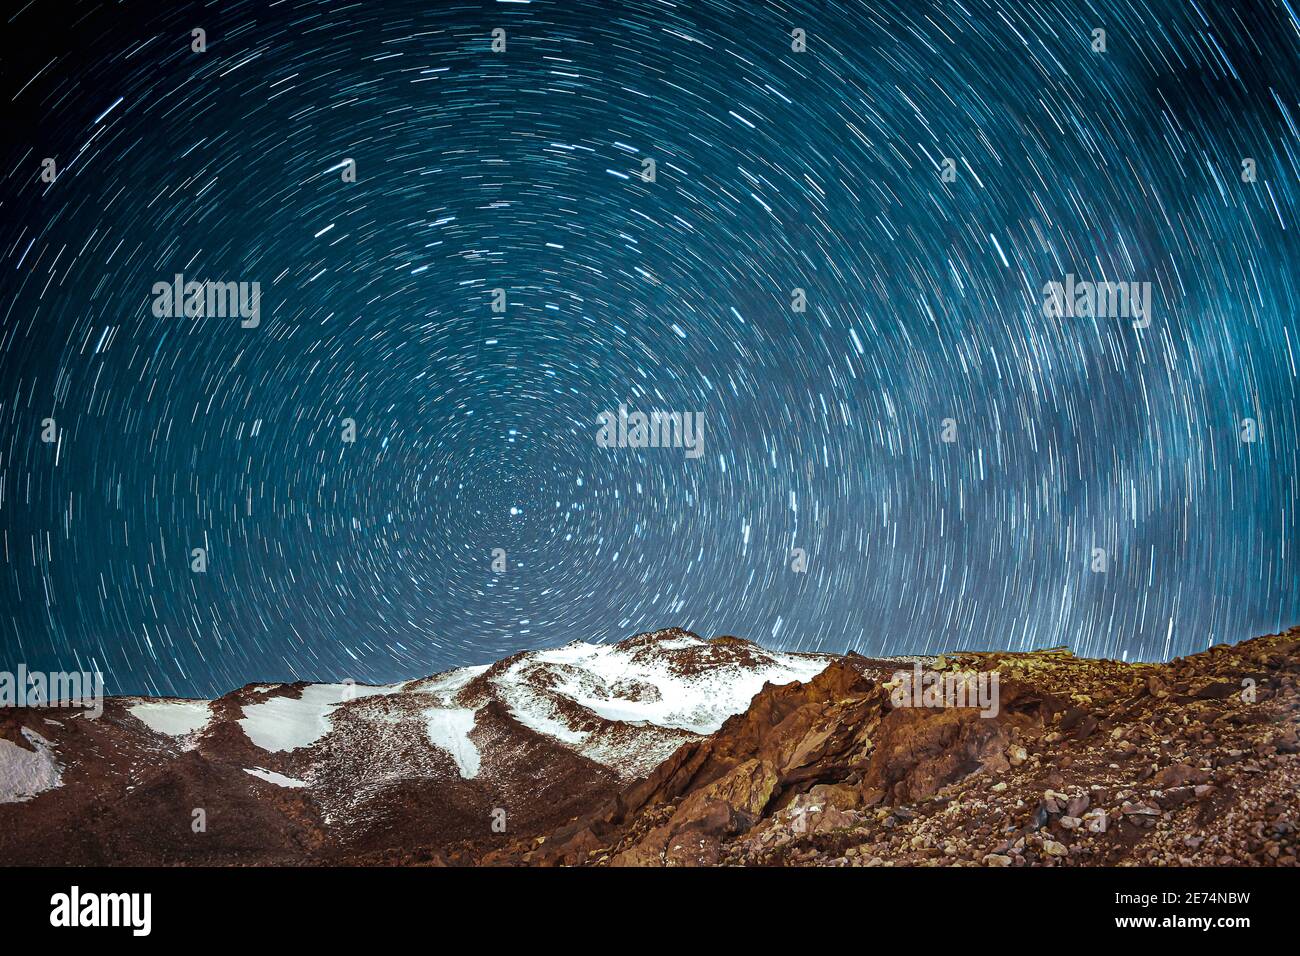 Peak of mount Damavand in Iran with star trails at night. Stock Photo